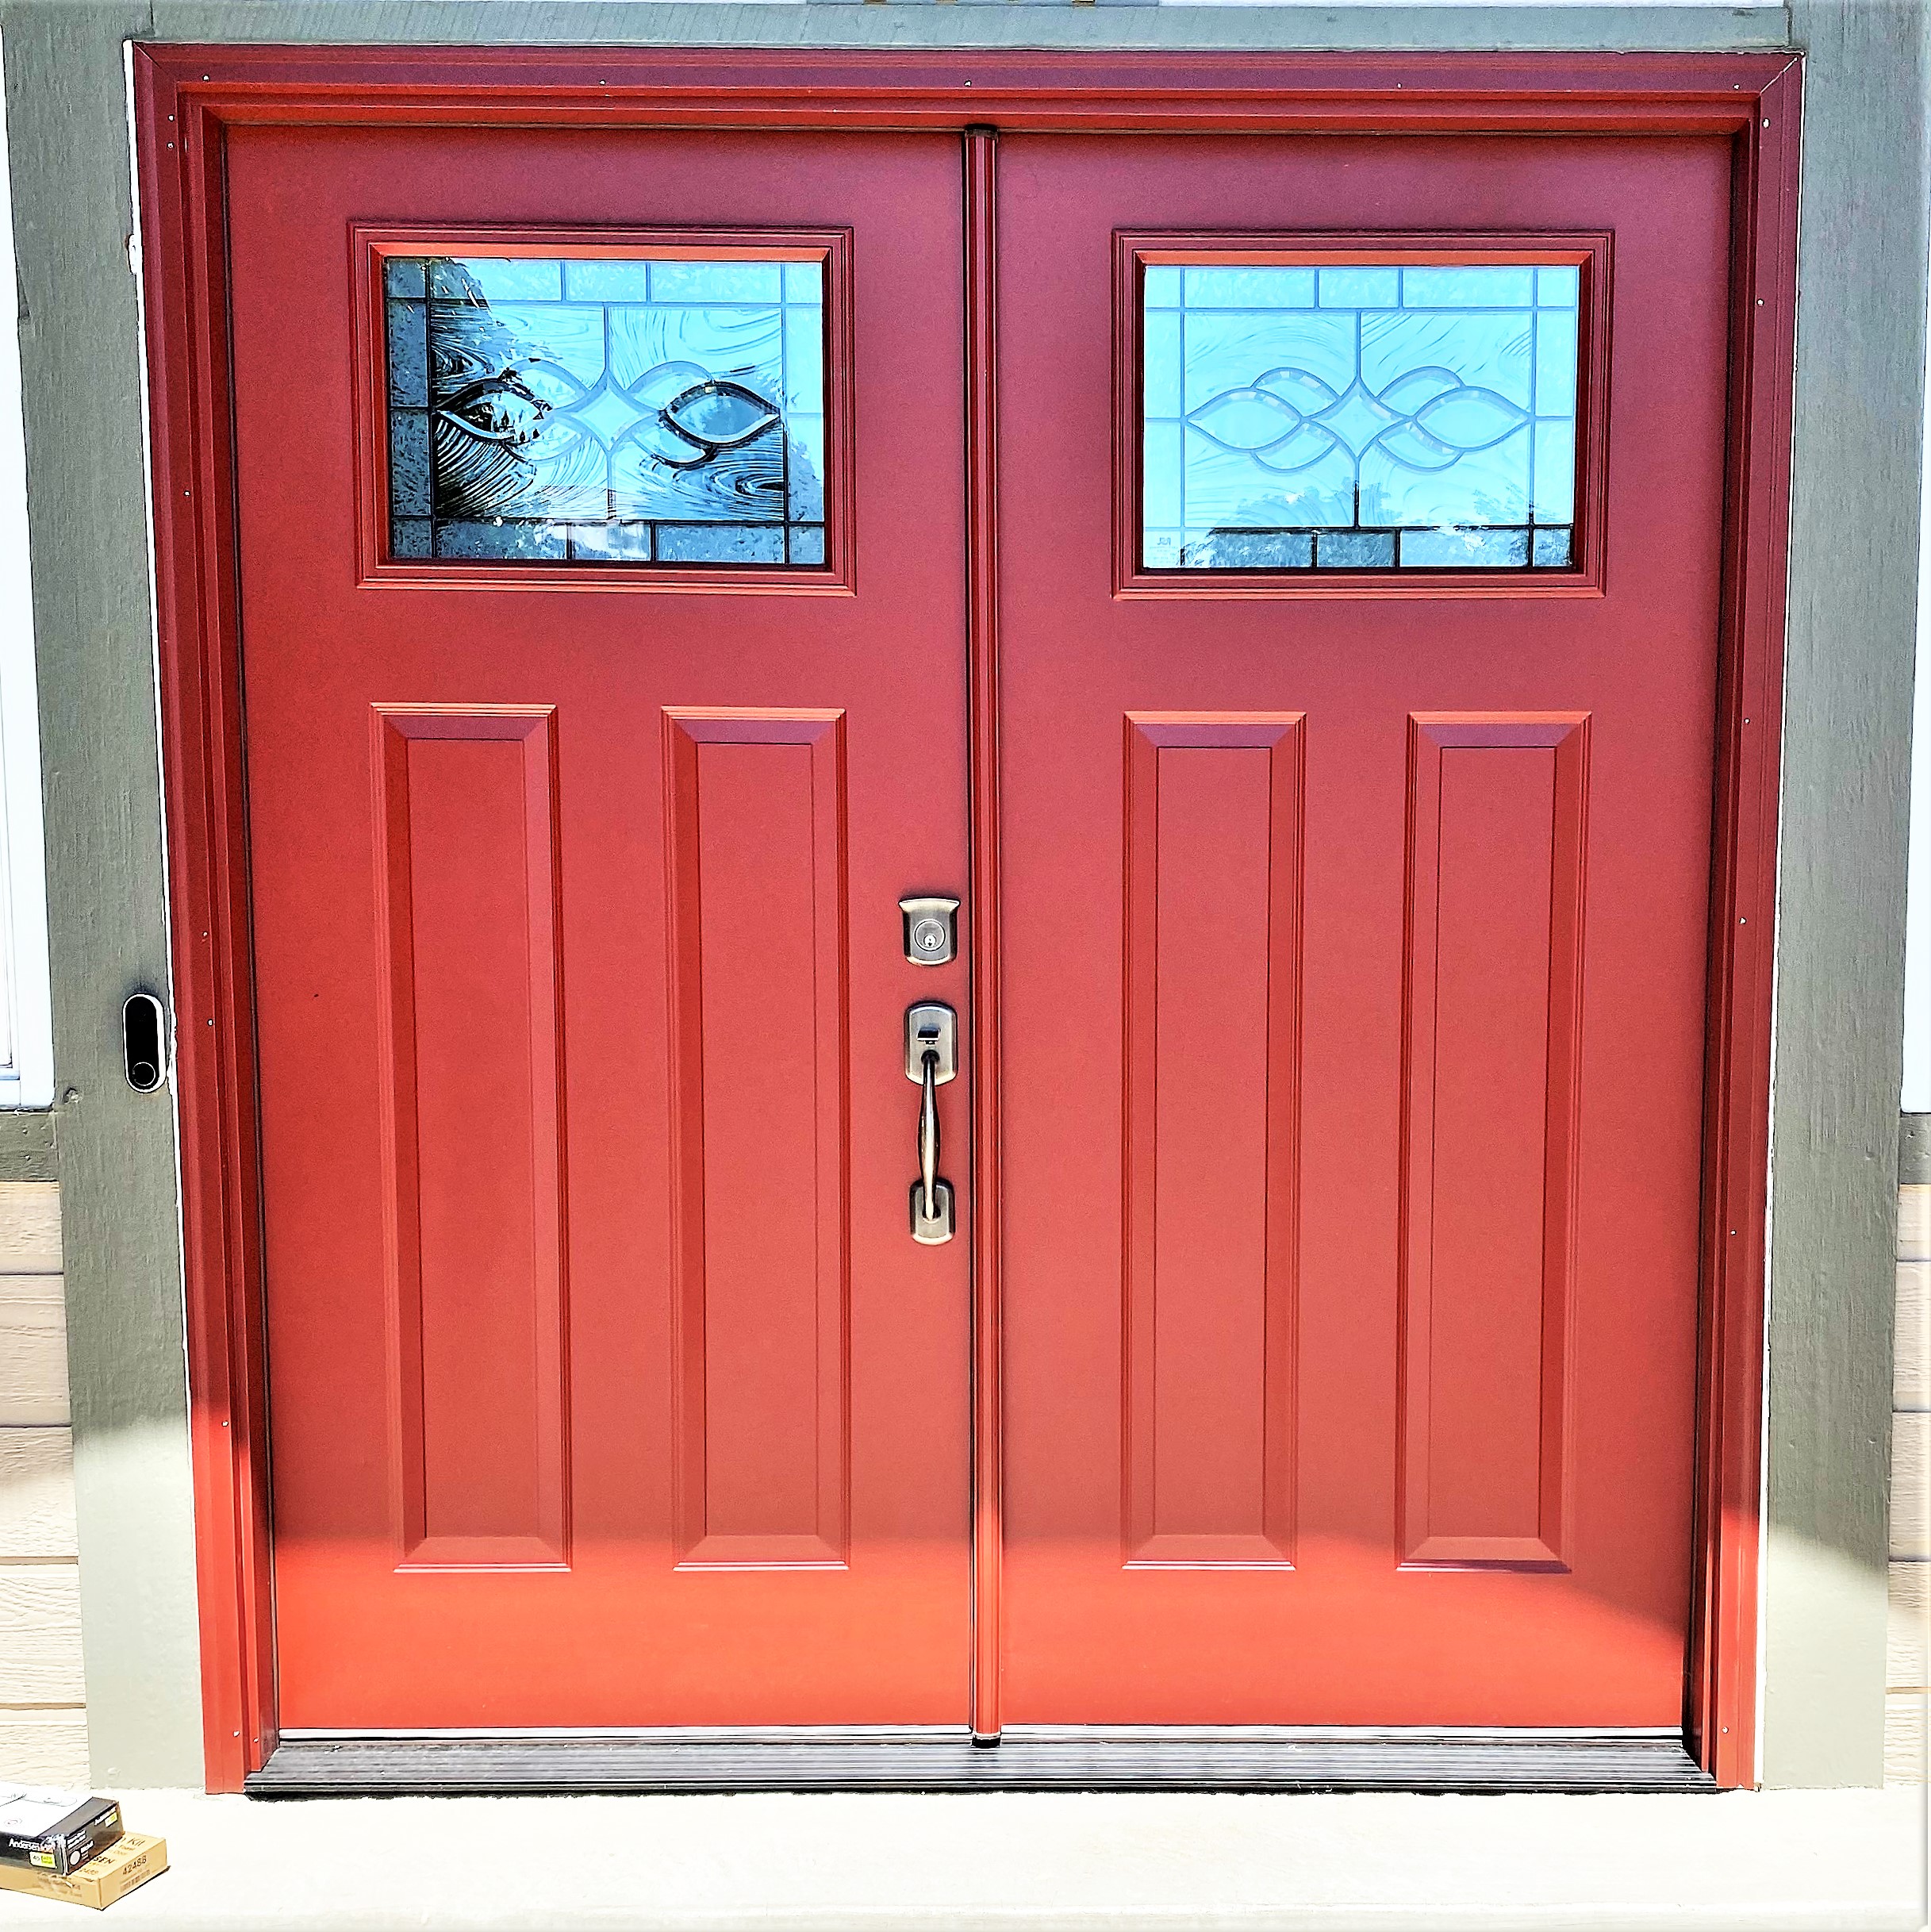 Red French entry doors, each with 2 vertical panels & a rectangular 1/4 lite, leaded glass window on top